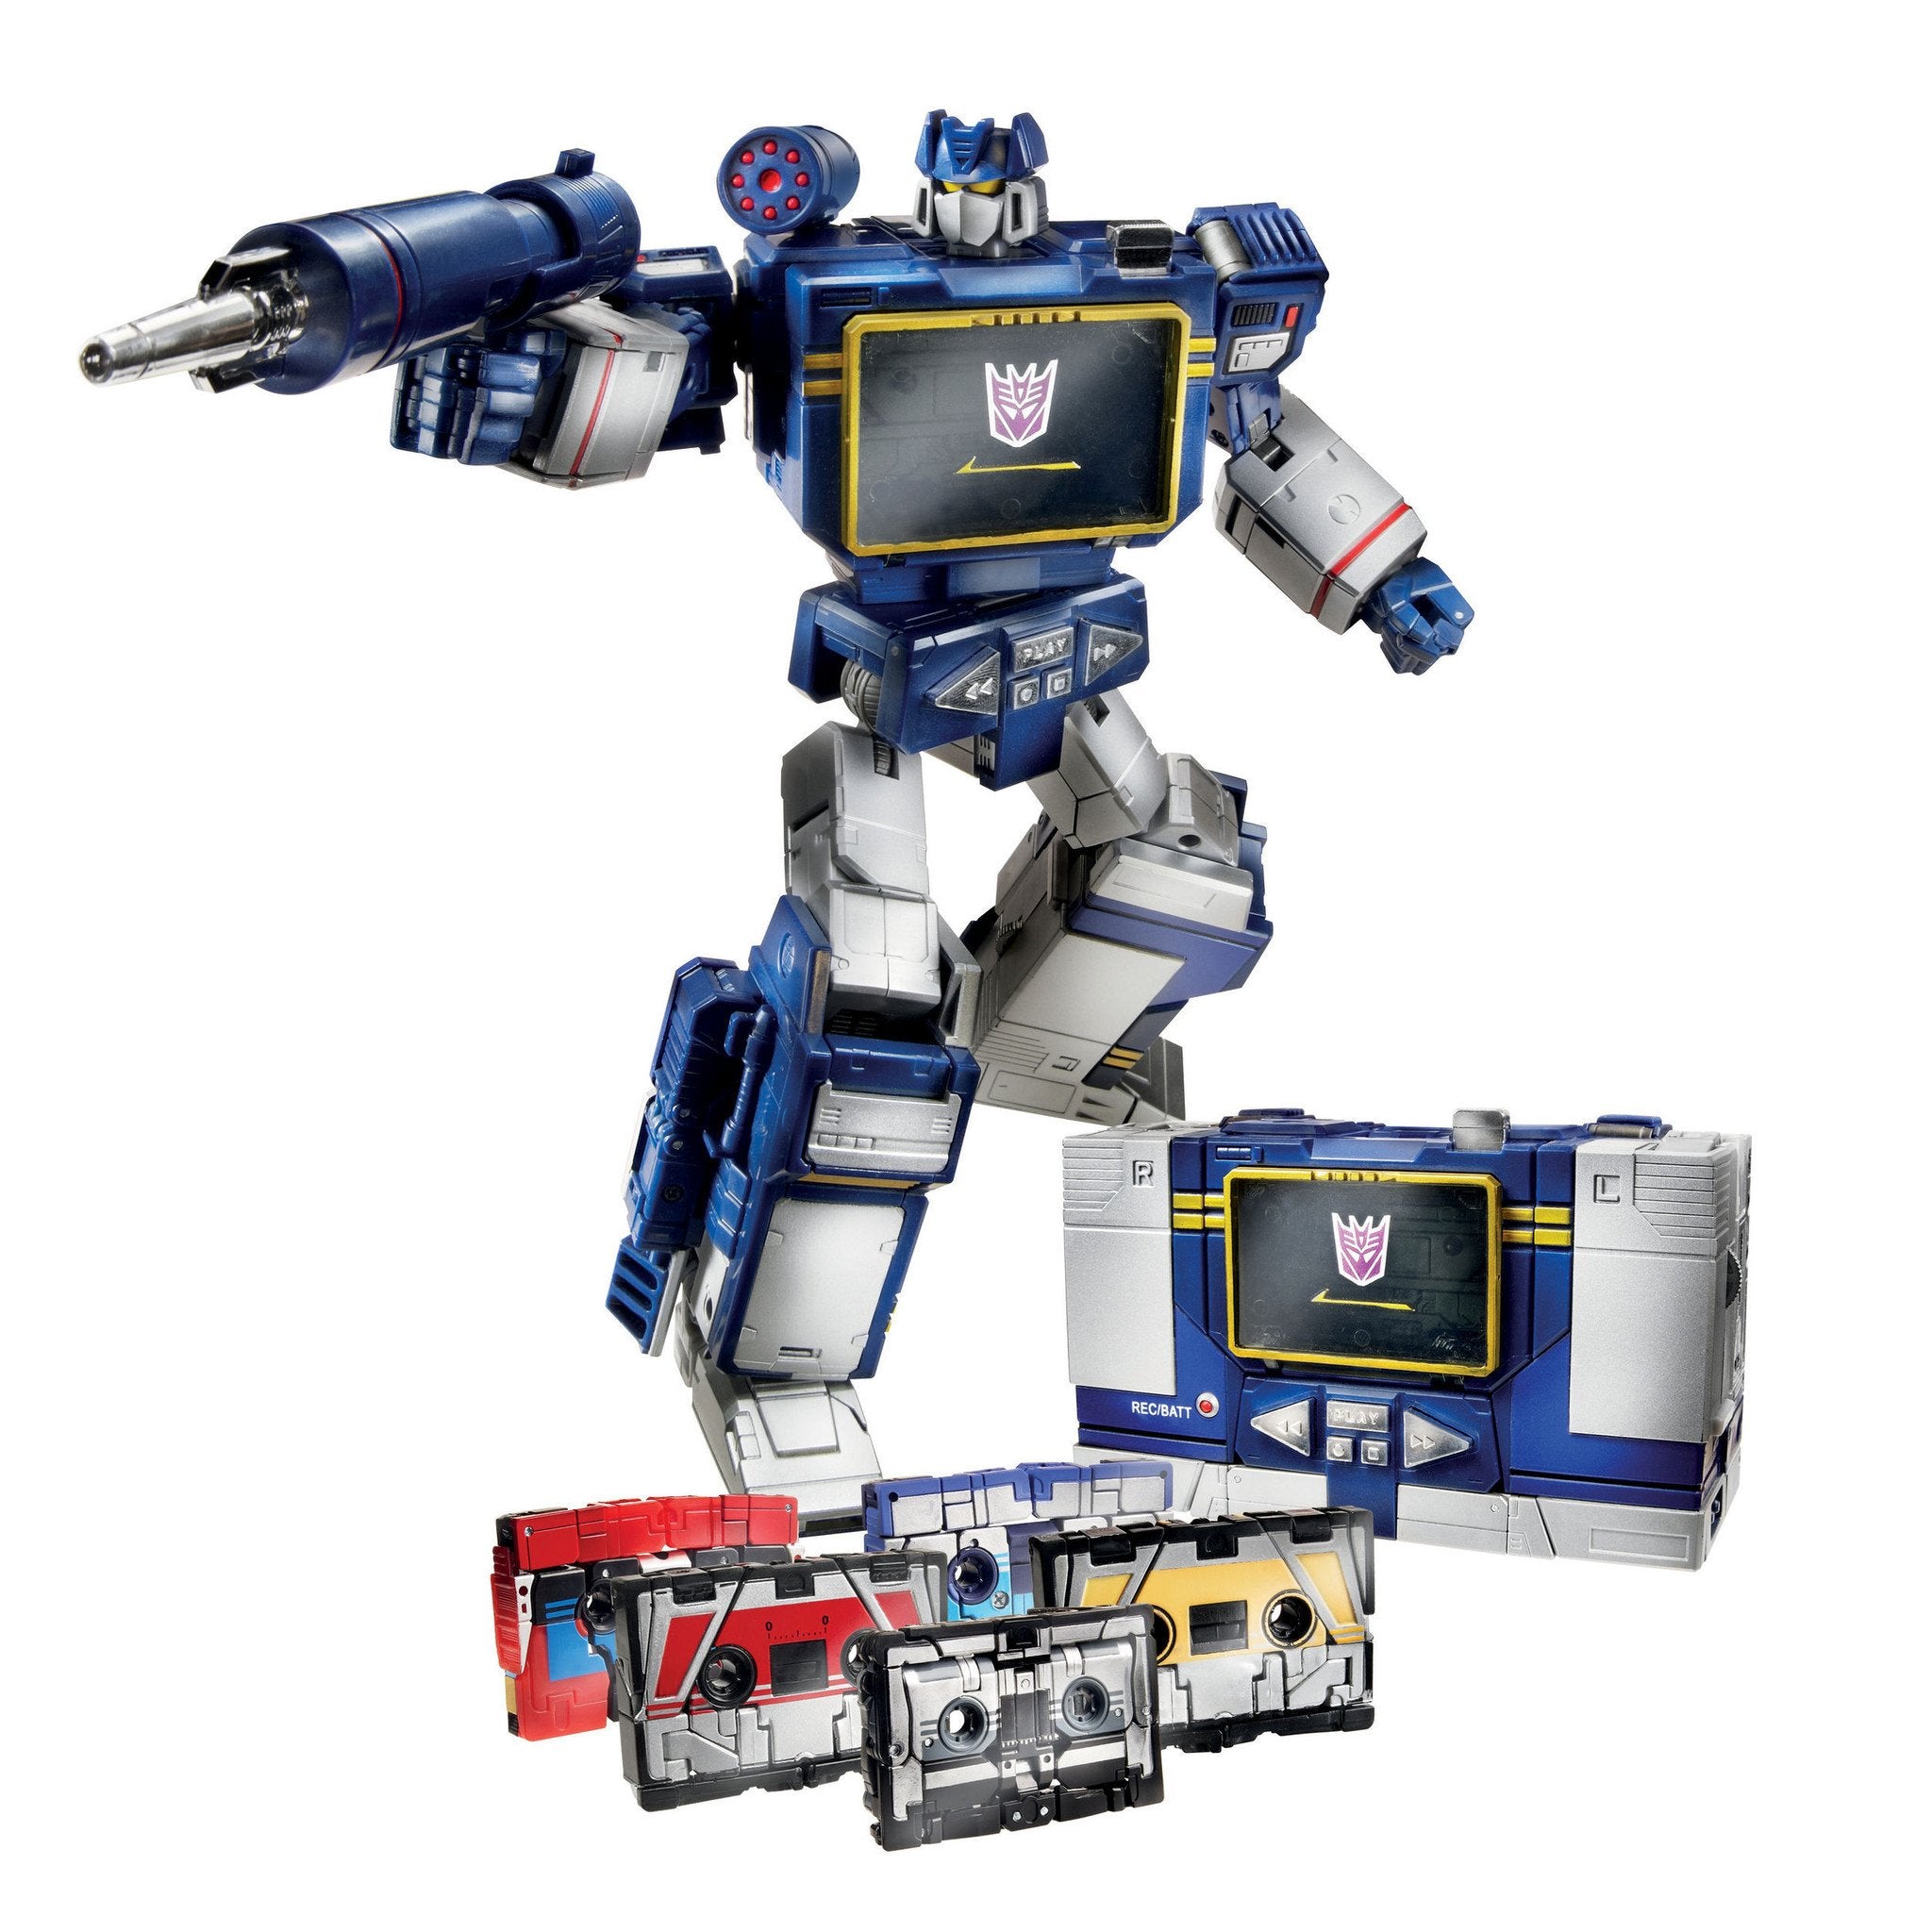 Transformers Masterpiece MP-02 Asia Exclusive Soundwave with 5 Cassestes